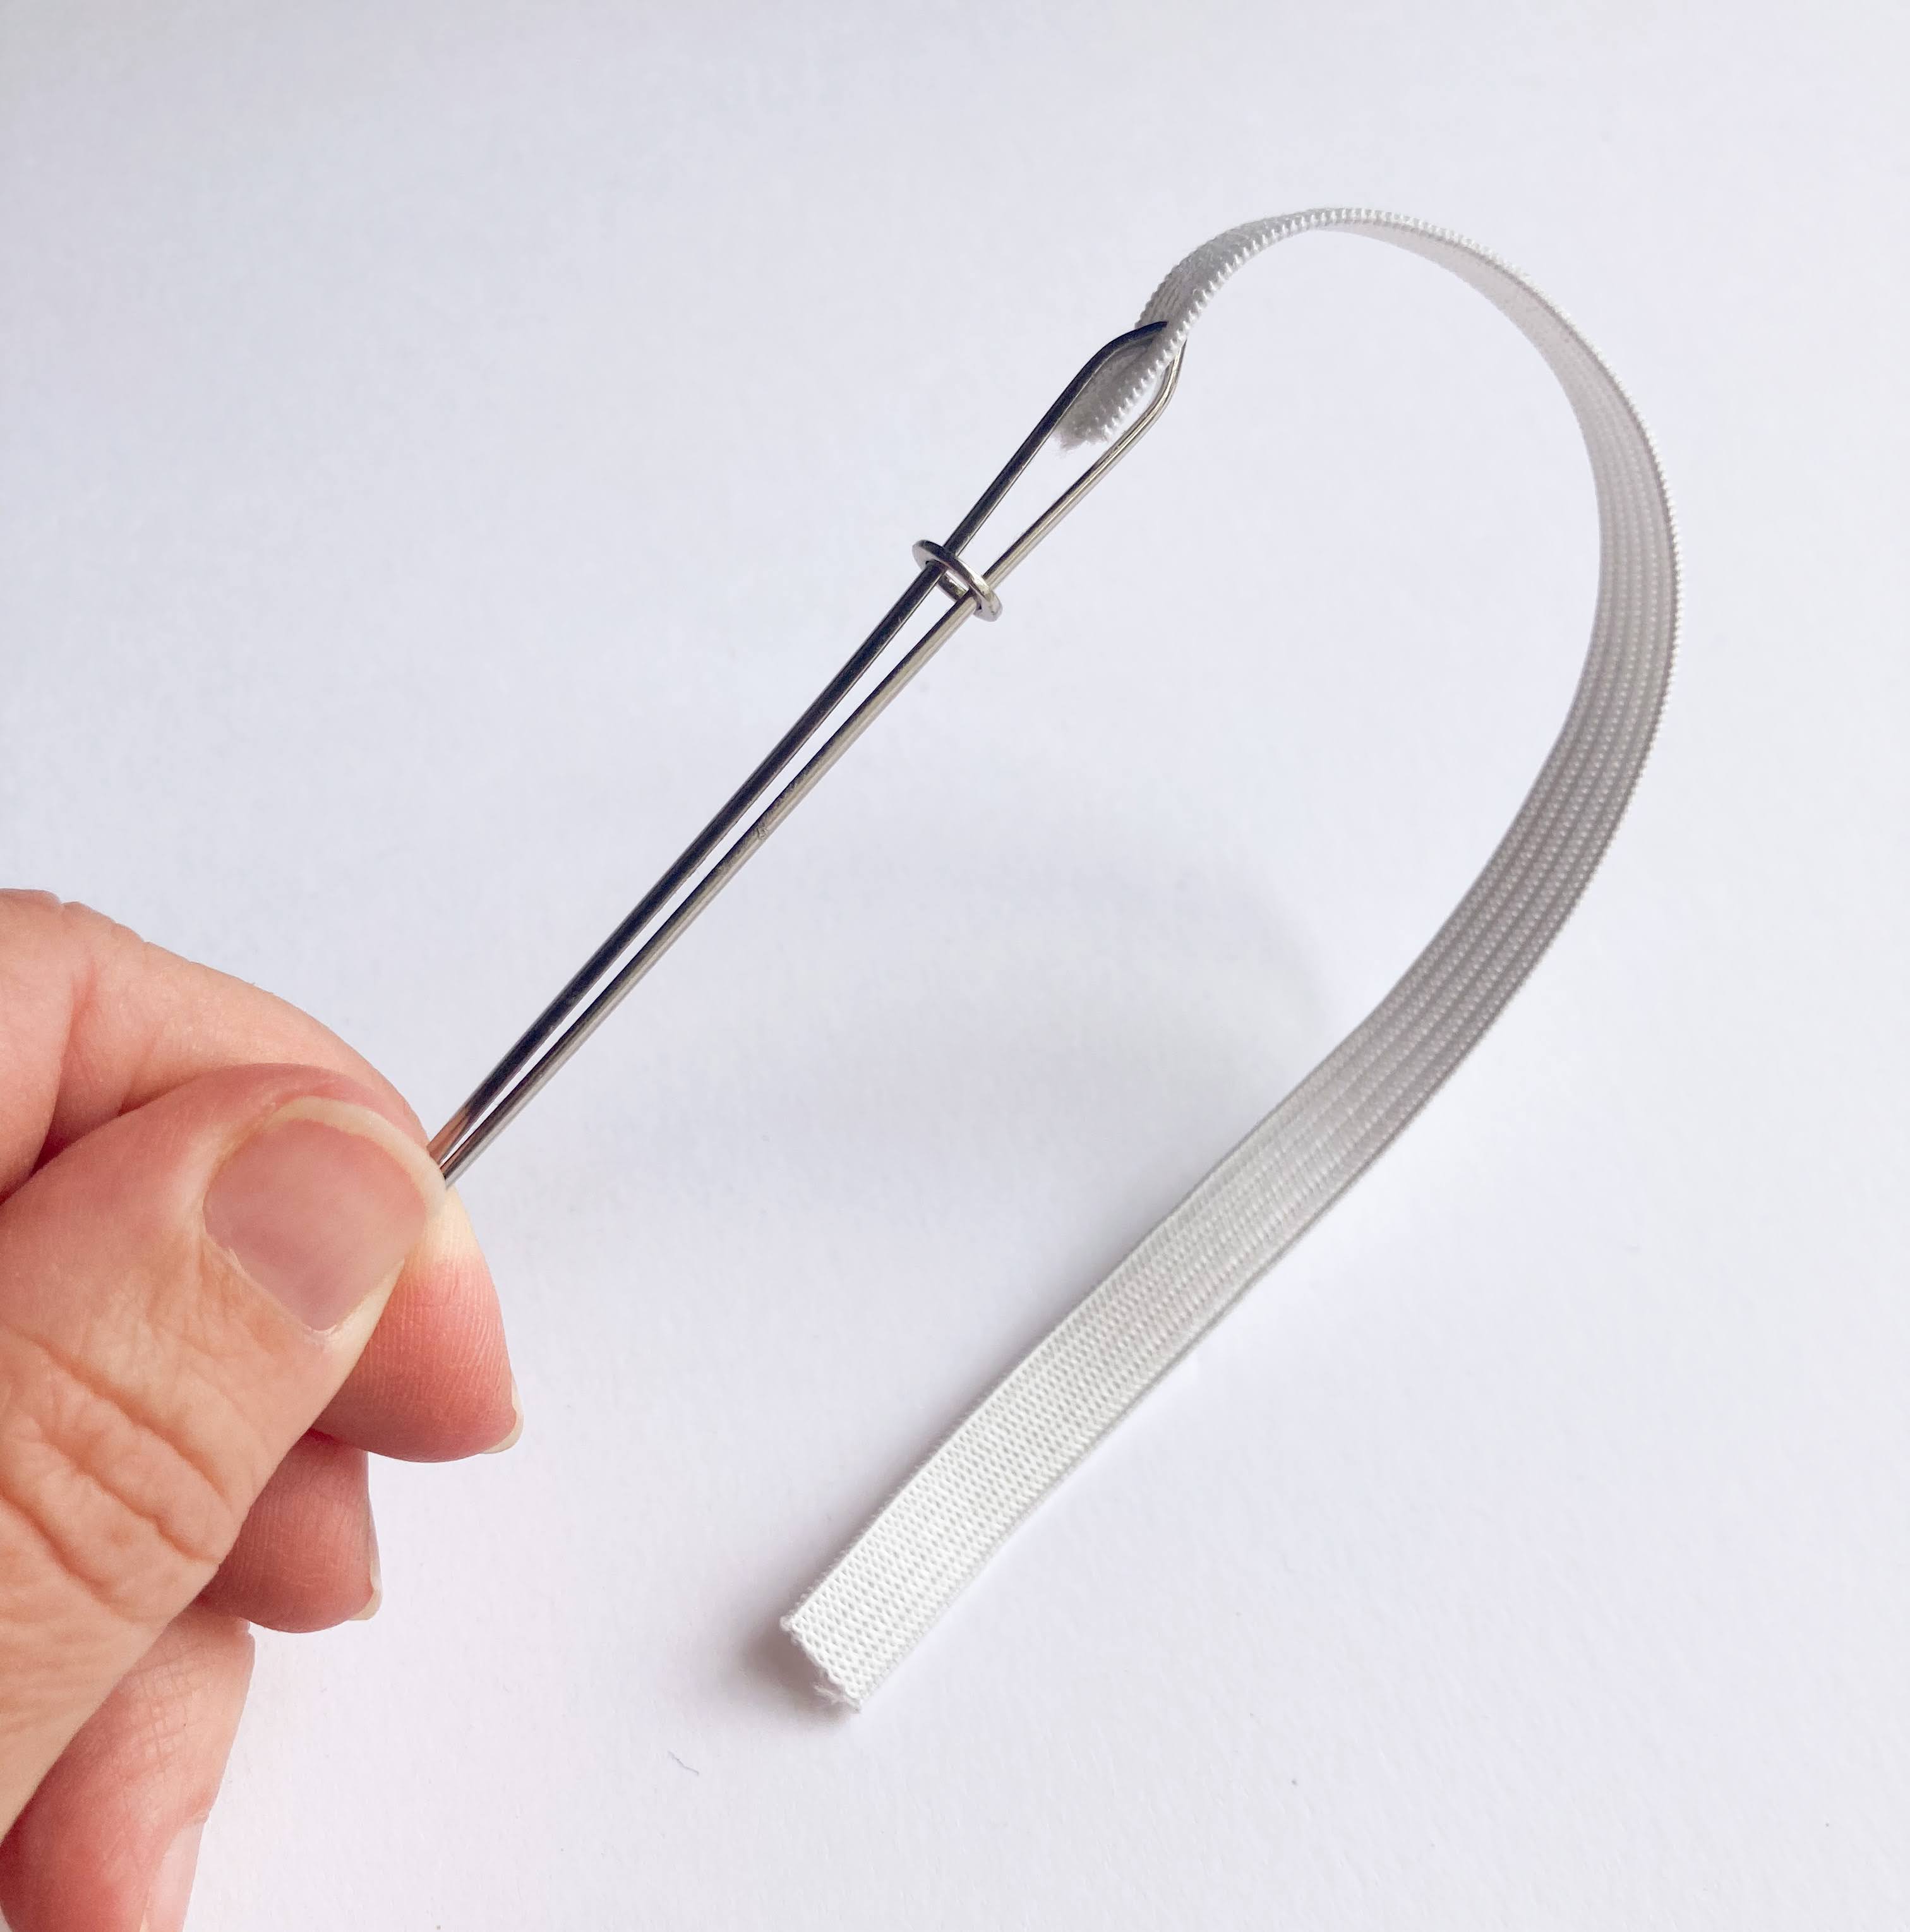 High Quality BODKINS Elastic THREADER, PINCER or Threaded Sewing TOOL for  DIY